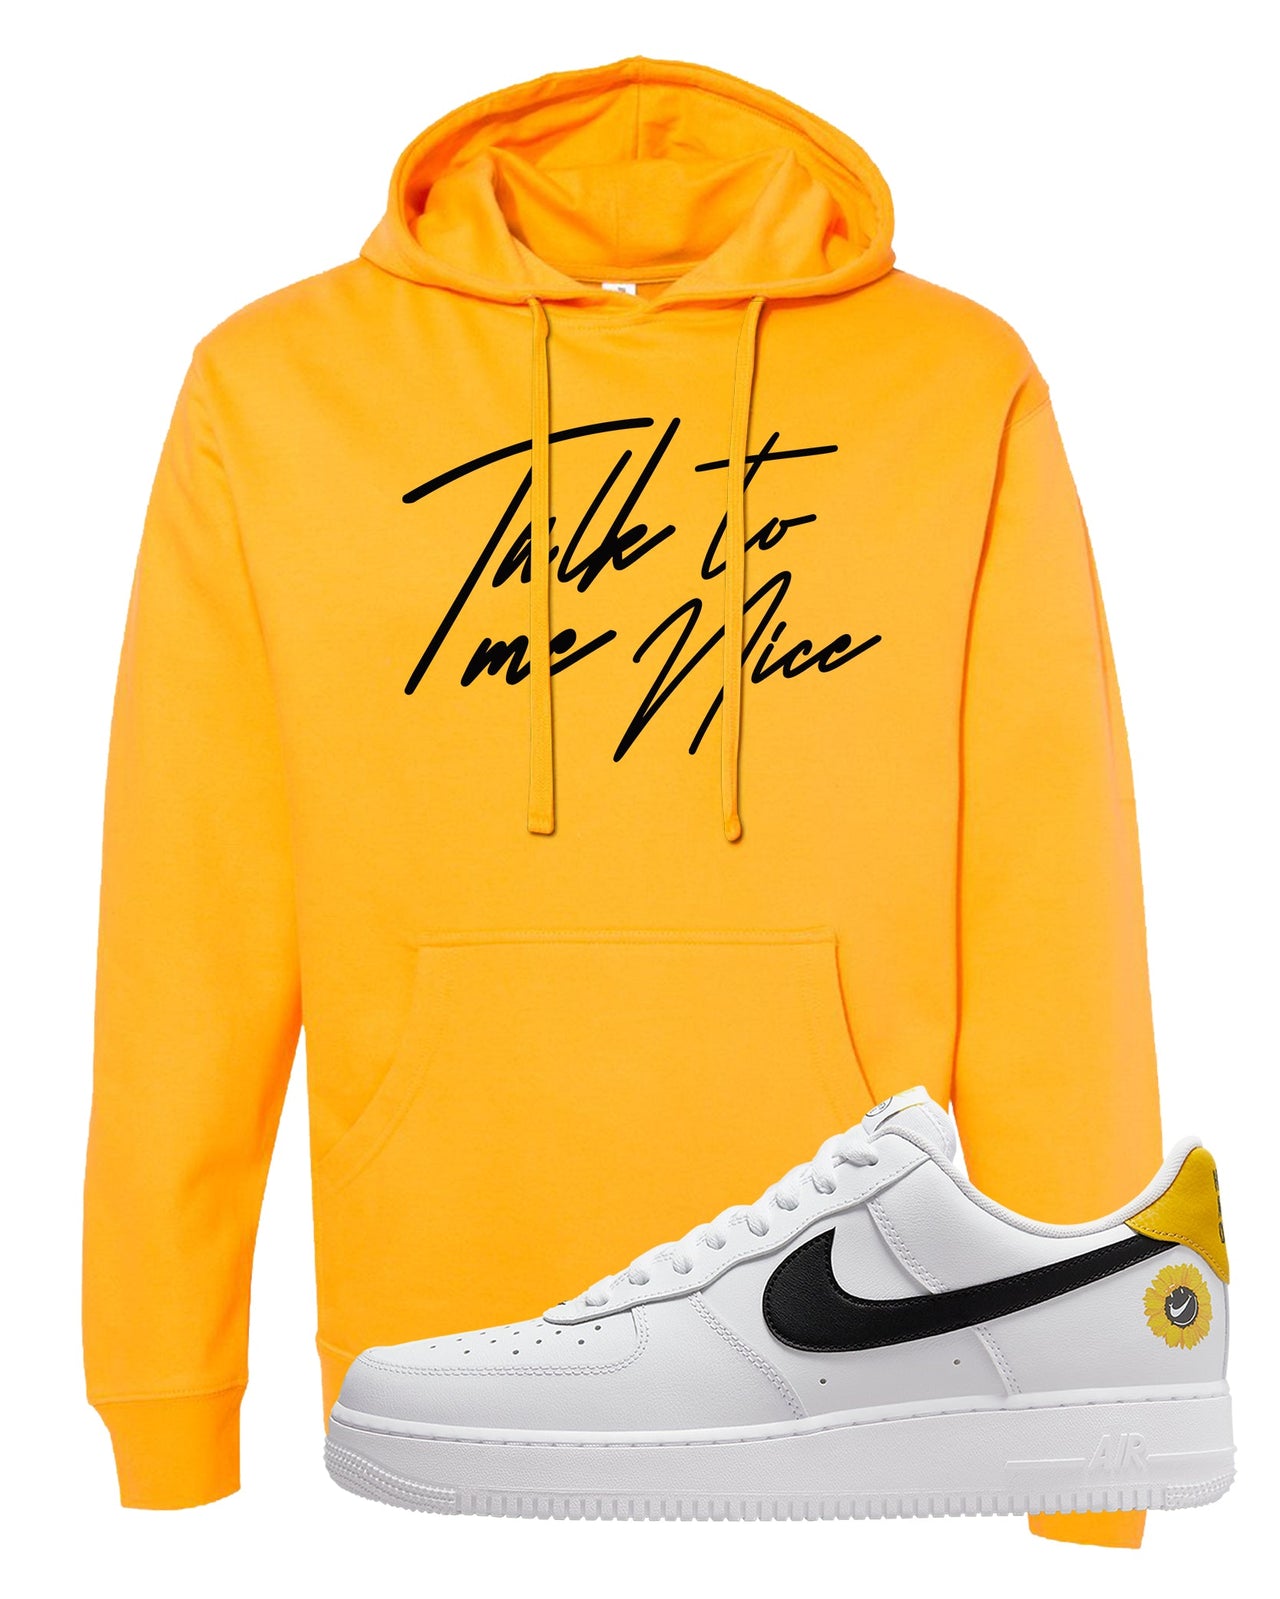 Have A Nice Day AF1s Hoodie | Talk To Me Nice, Gold